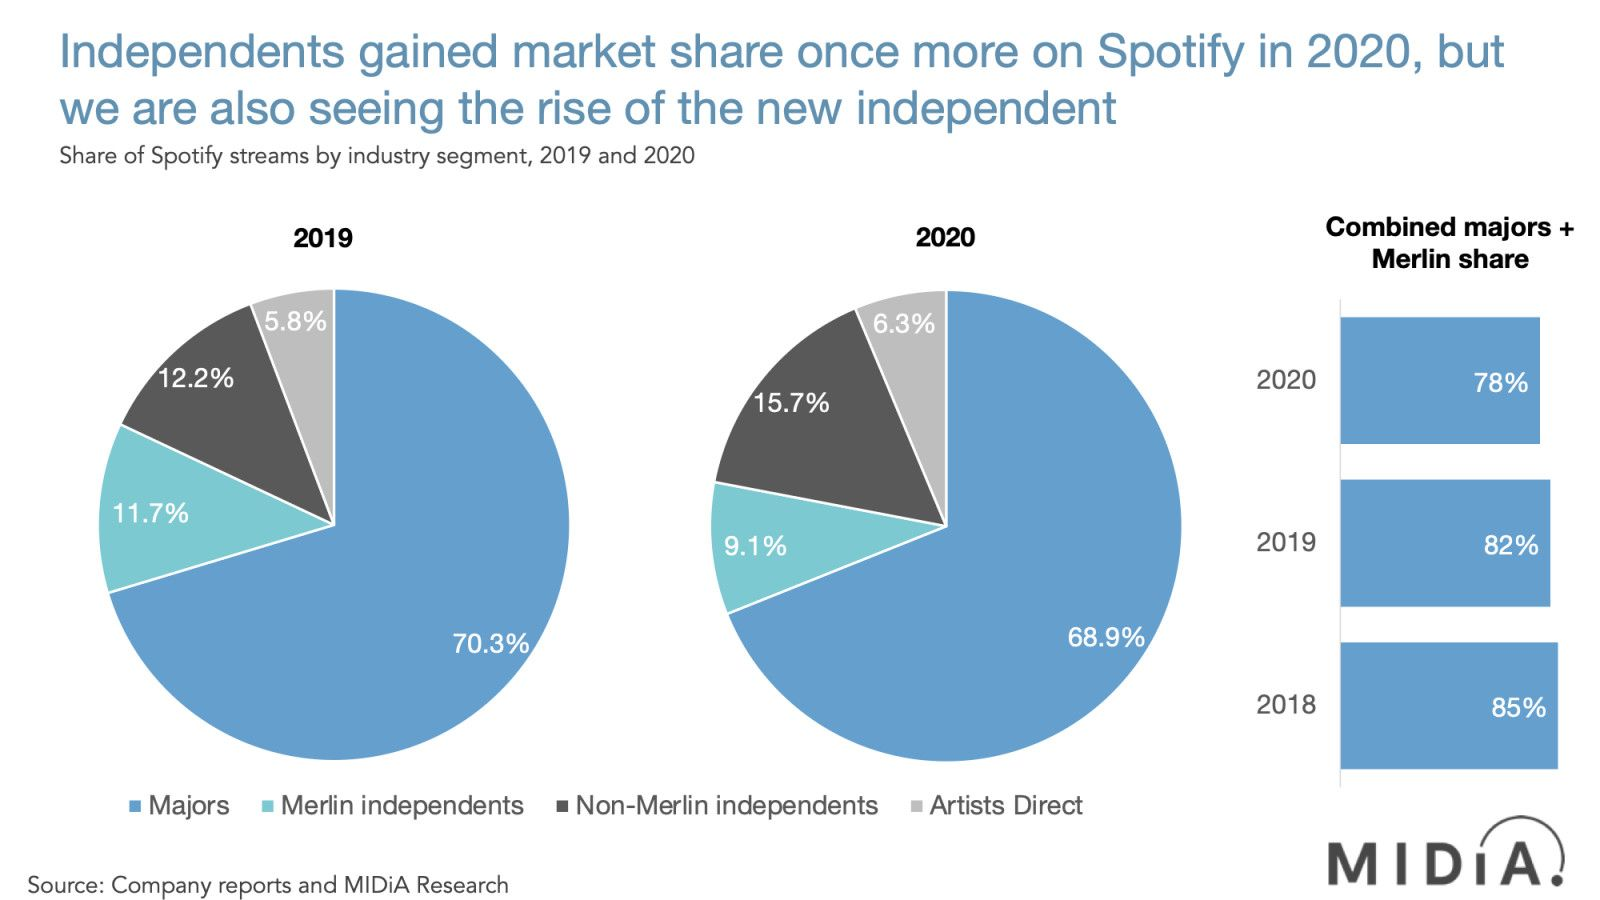 https://www.midiaresearch.com/blog/smaller-independents-and-artists-direct-grew-fastest-in-2020